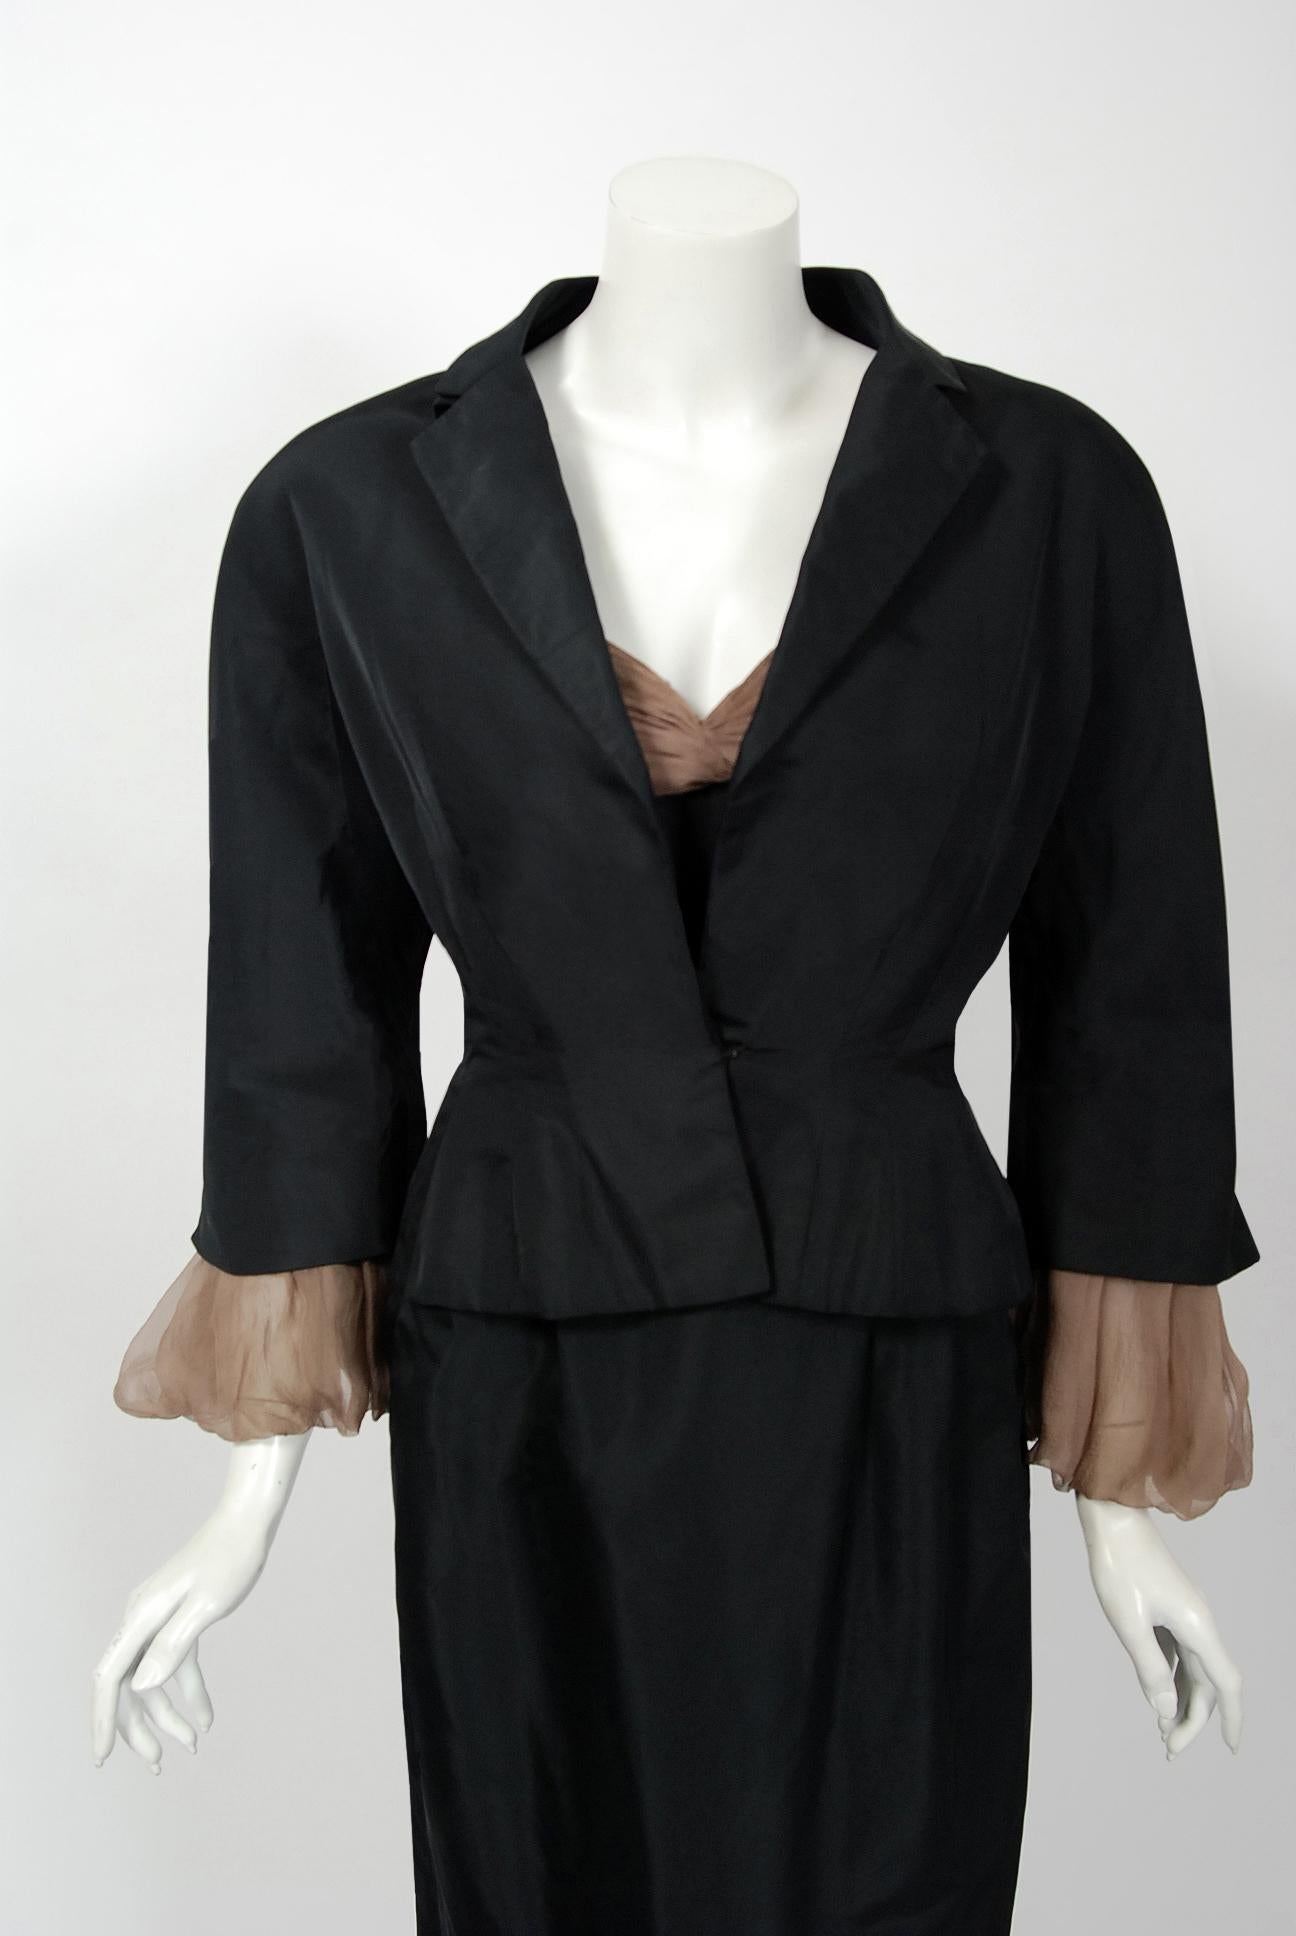 Gorgeous Pierre Balmain black silk and nude chiffon hourglass cocktail dress dating back to his 1950 collection. Balmain created a very sculptural quality which was always allied with a ladylike essence. His garments have a body and a shape of their